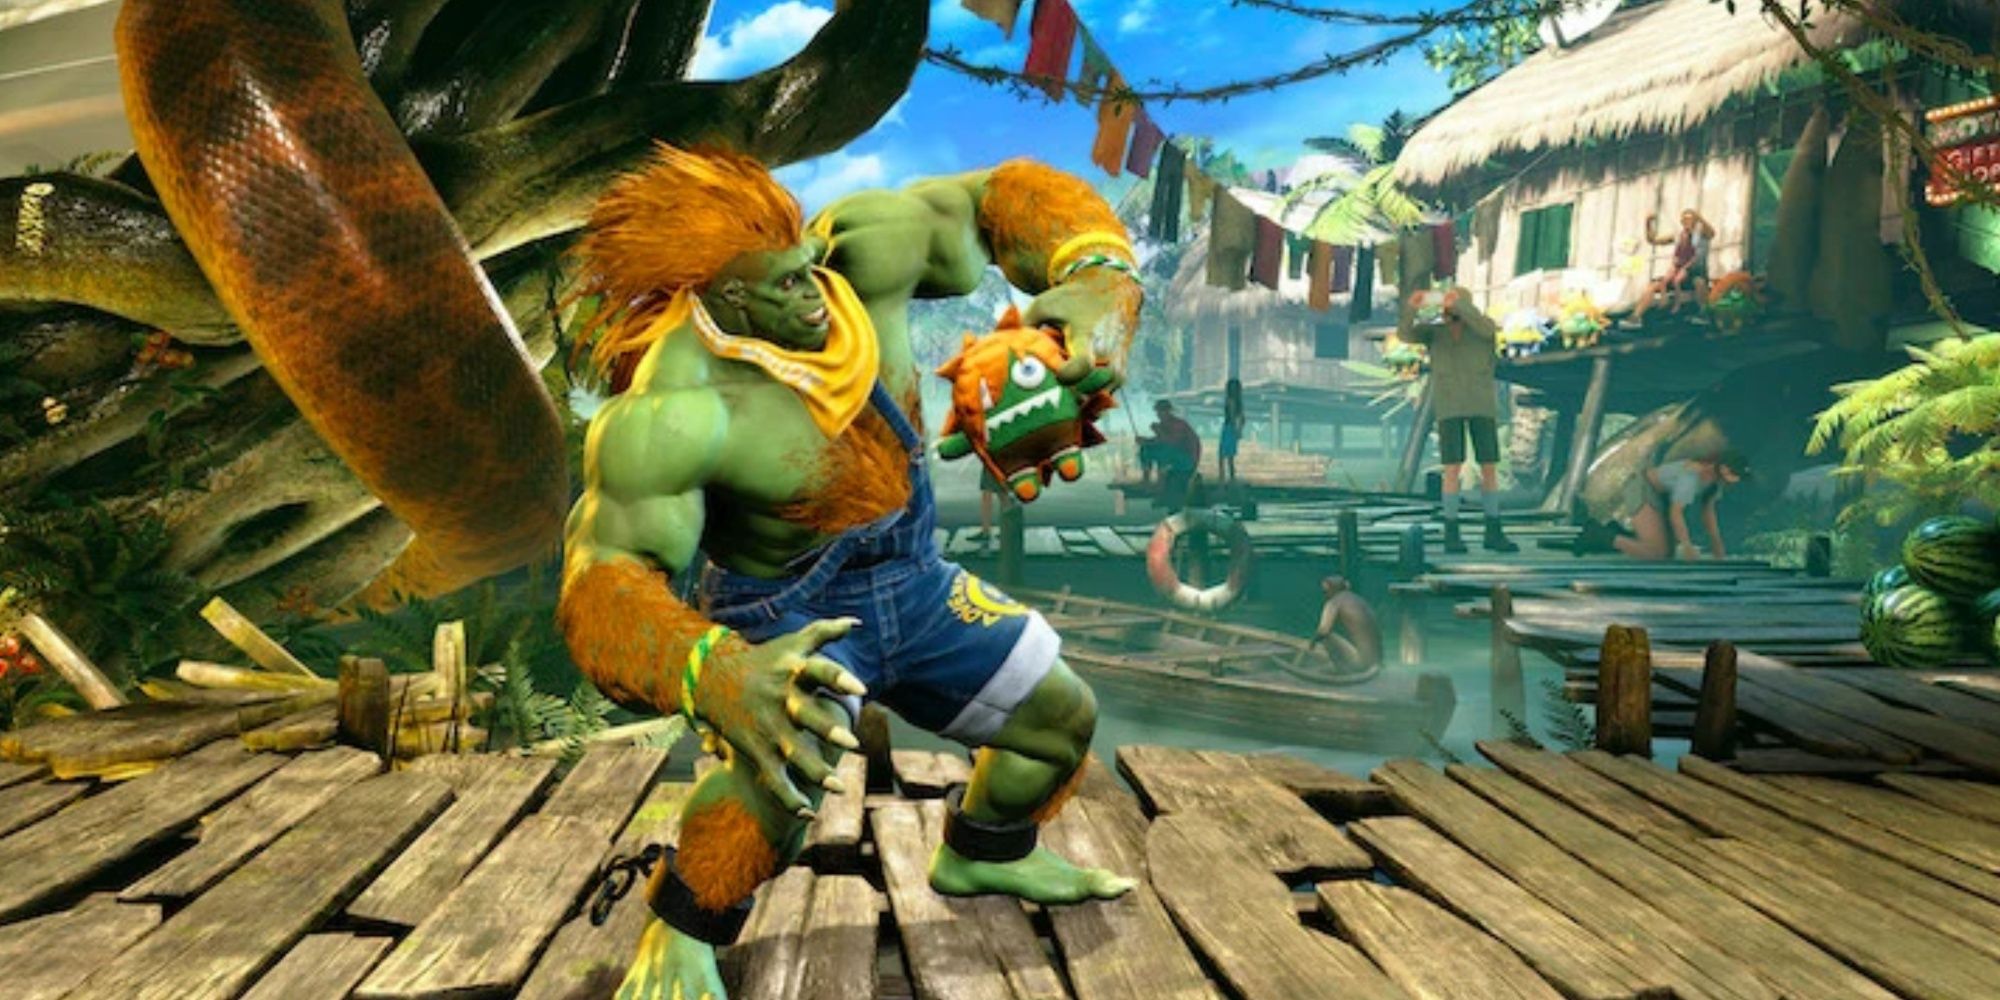 Blanka posing with a plush of himself in Street Fighter 6